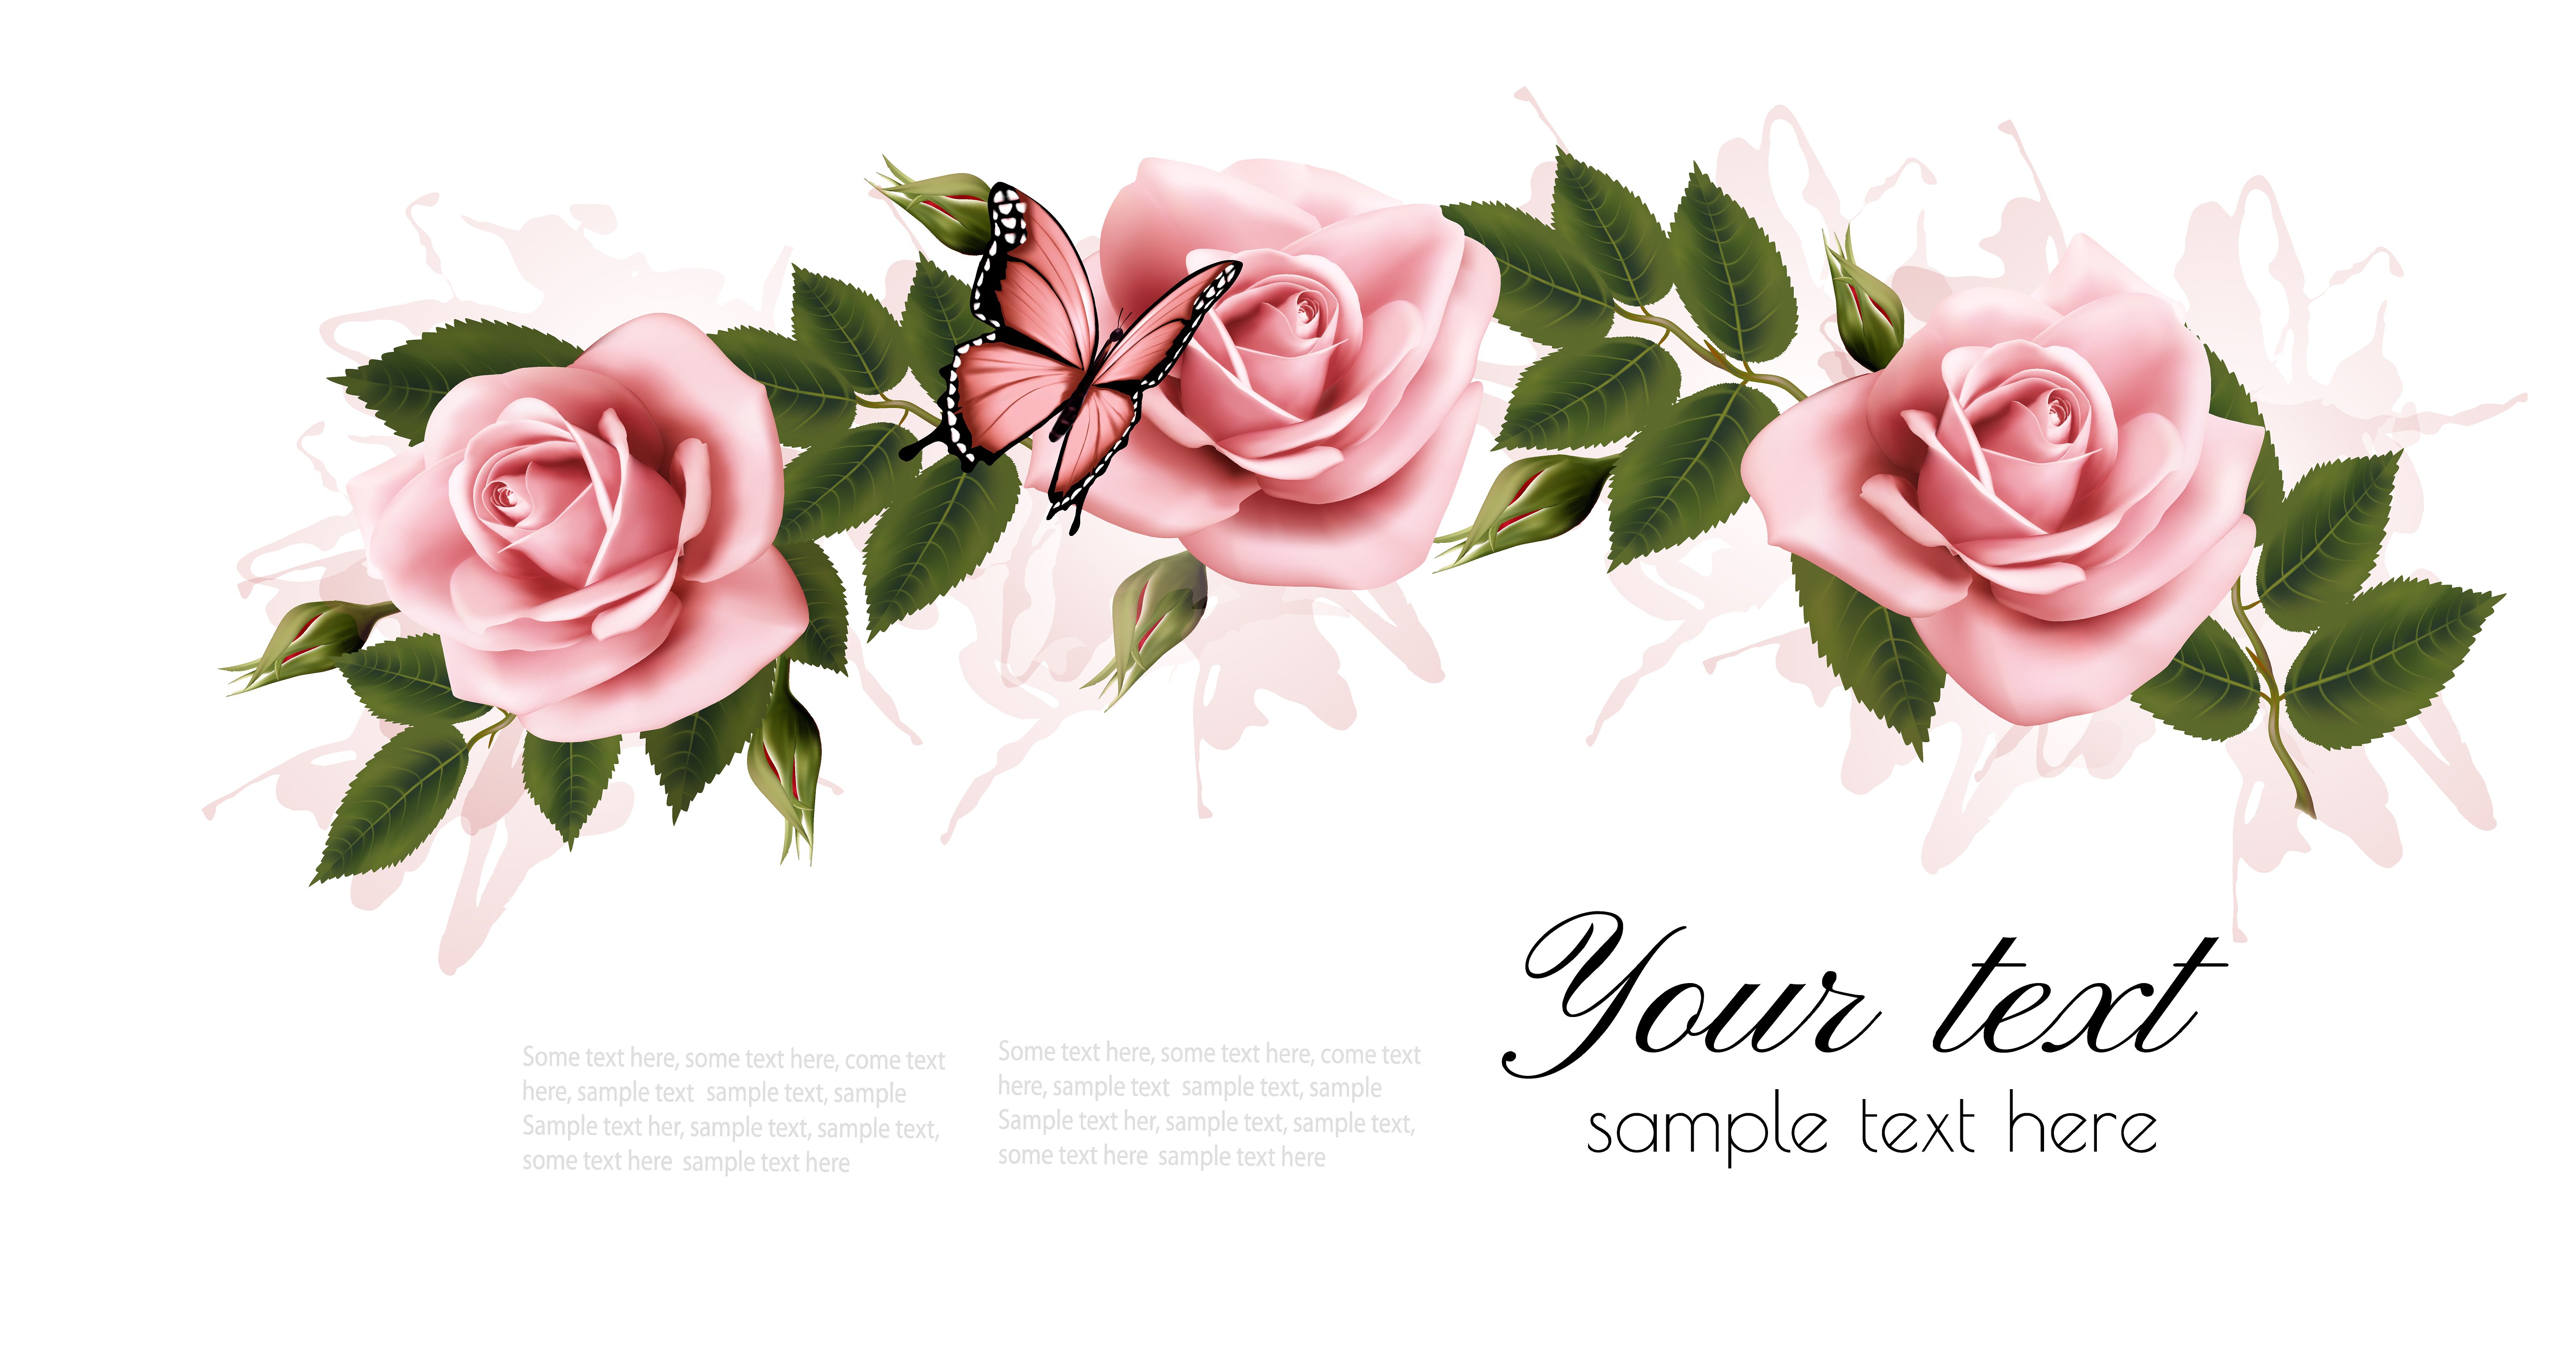 Flower frame with beauty pink roses. ~ Illustrations ~ Creative Market